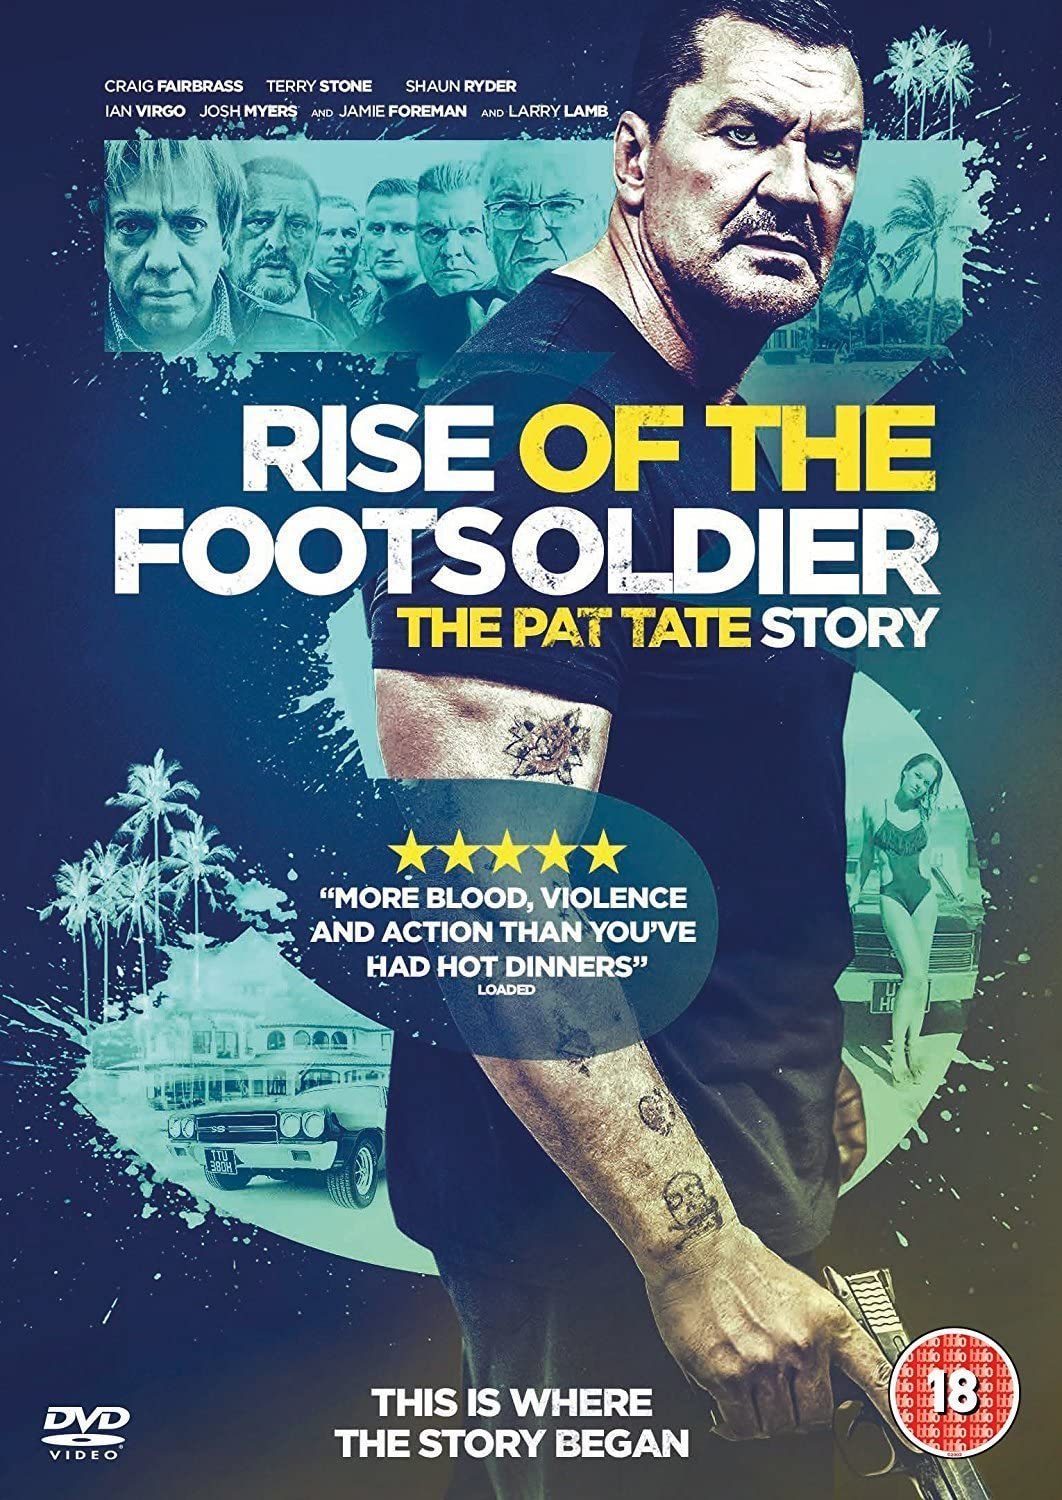 Rise of the Footsoldier 3 - Crime/Drama [DVD]